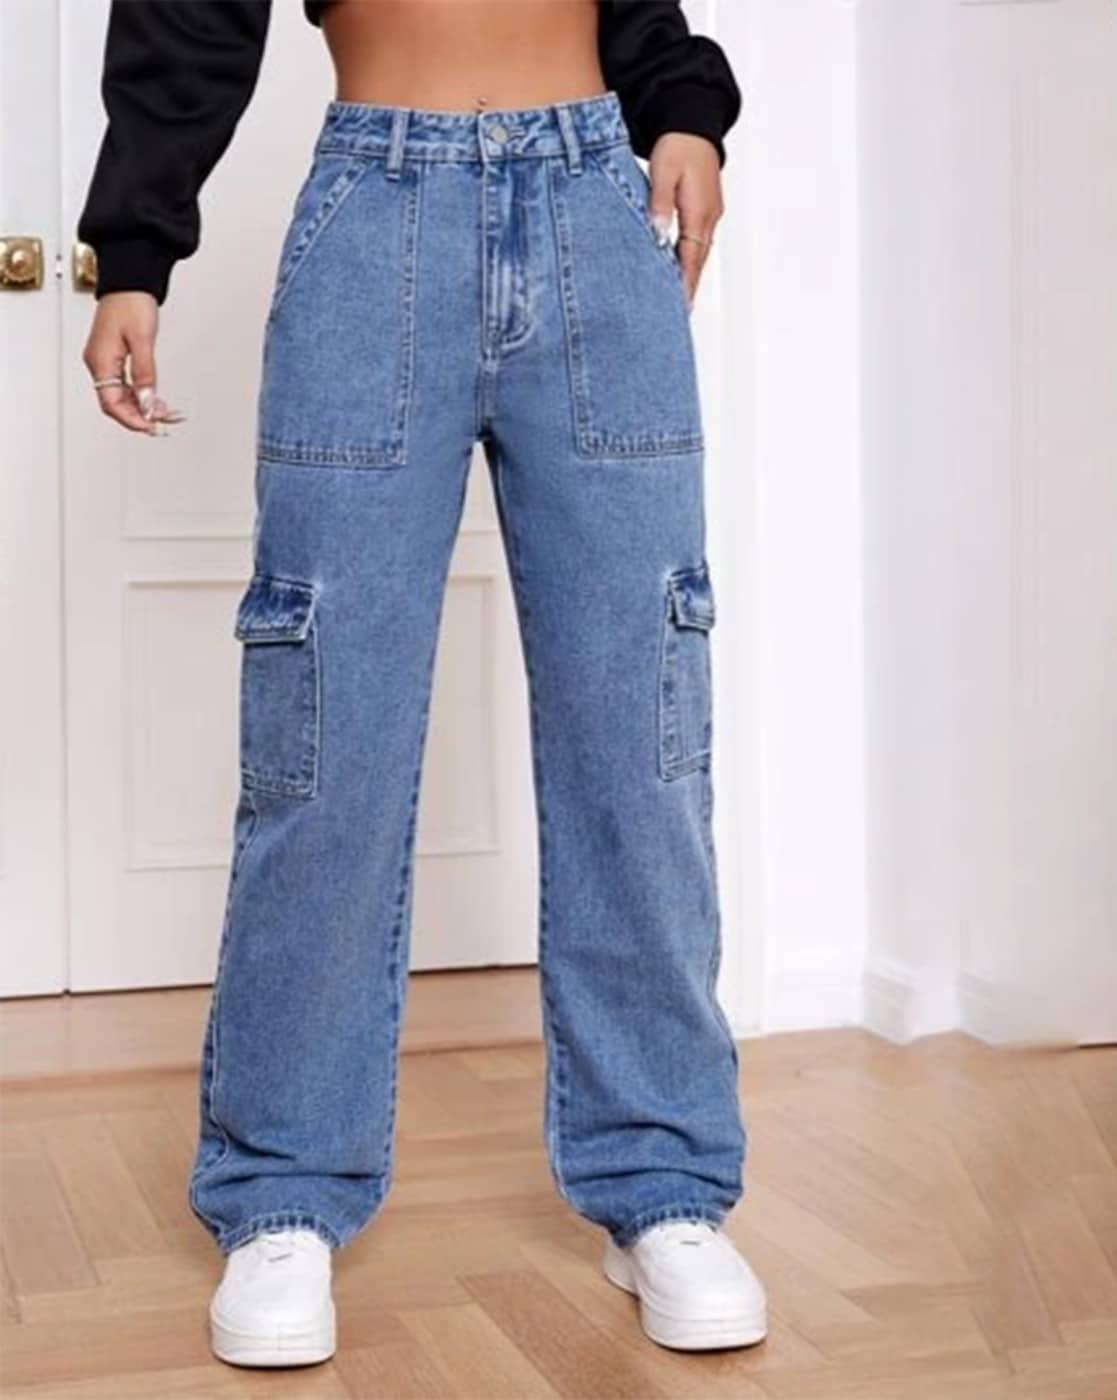 Womens Jeans Size Chart Conversion  Sizing Guide